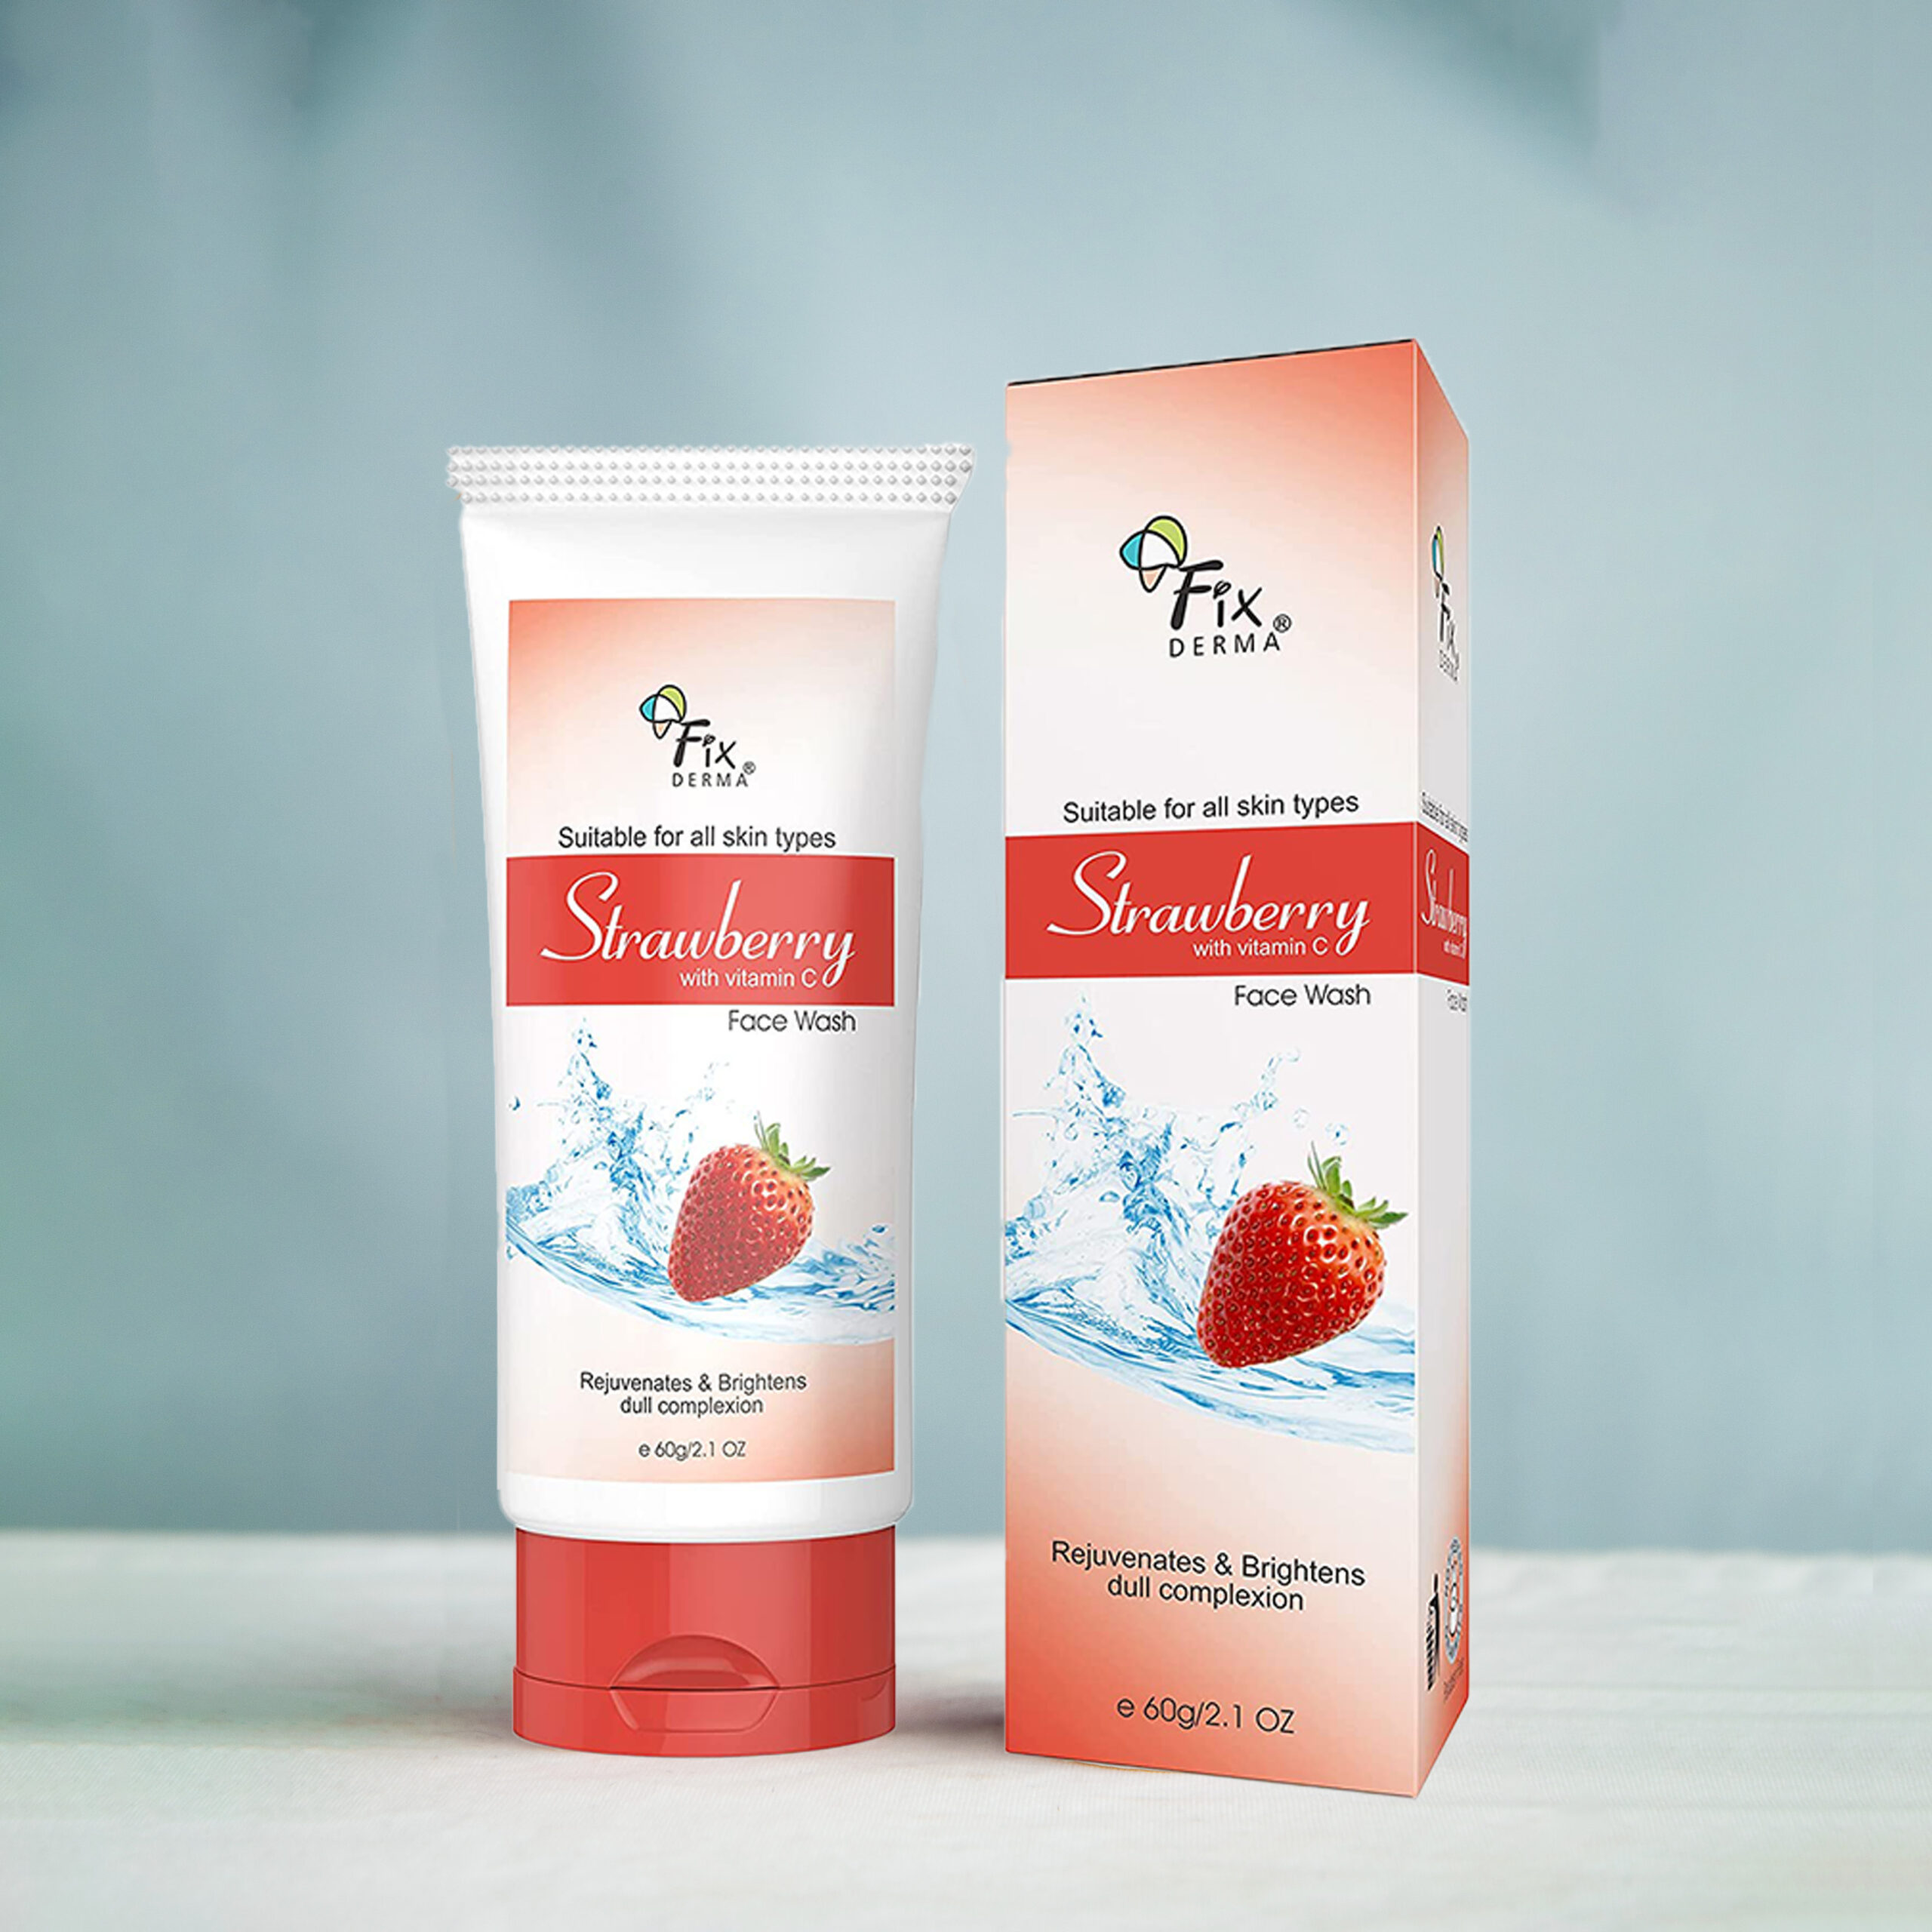 Fix Derma Strawberry Face Wash for dull skin, suitable for all skin types